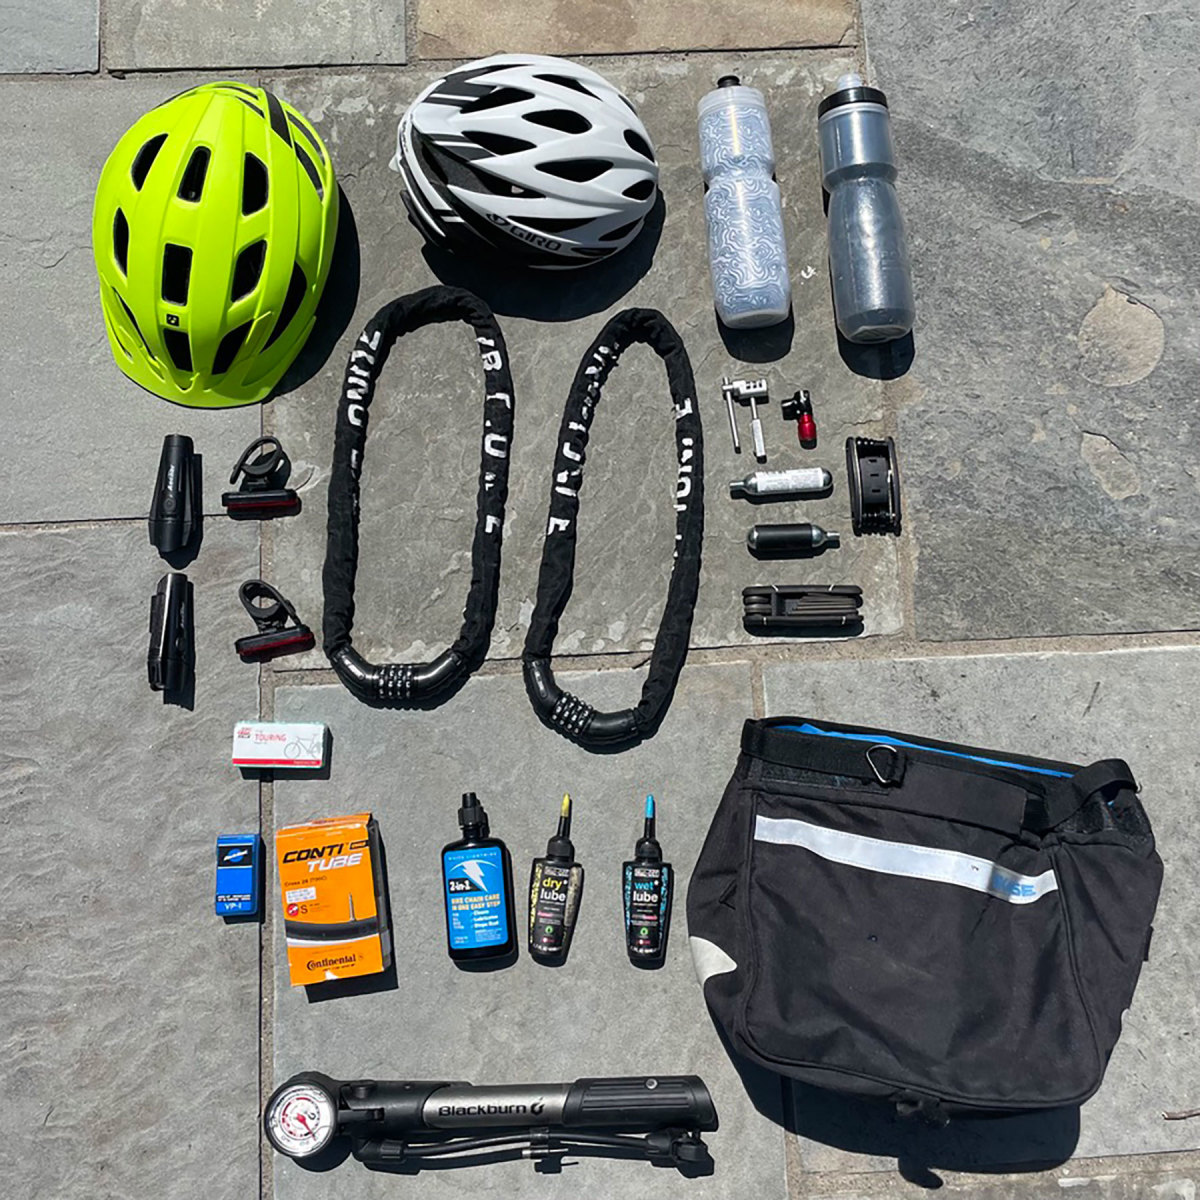 Our basic bike kit for safety and maintenance